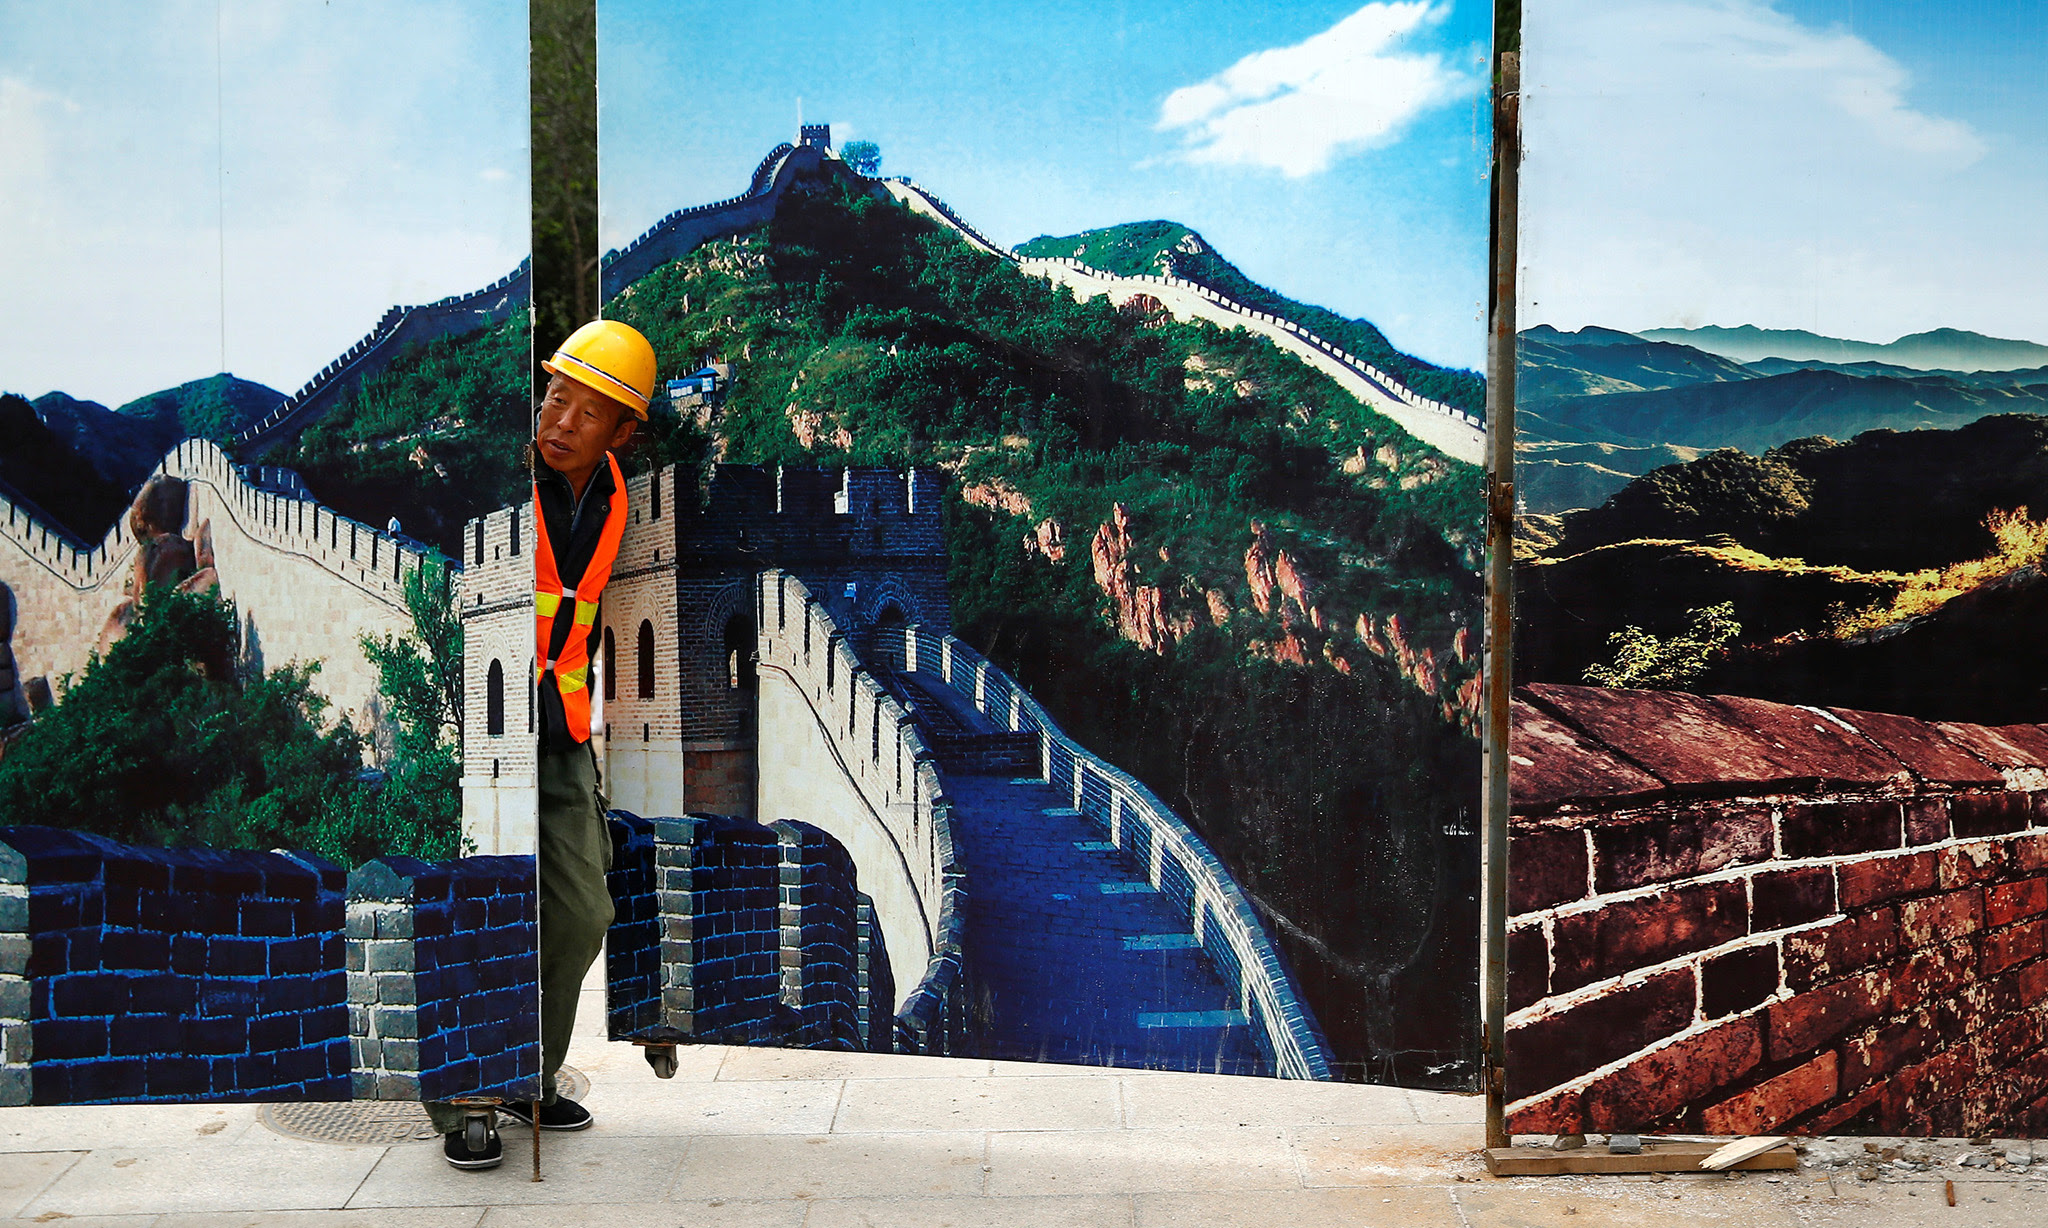 A worker looks through the fence of a construction site that is decorated with pictures of the Great Wall at Badaling, north of Beijing, China, September